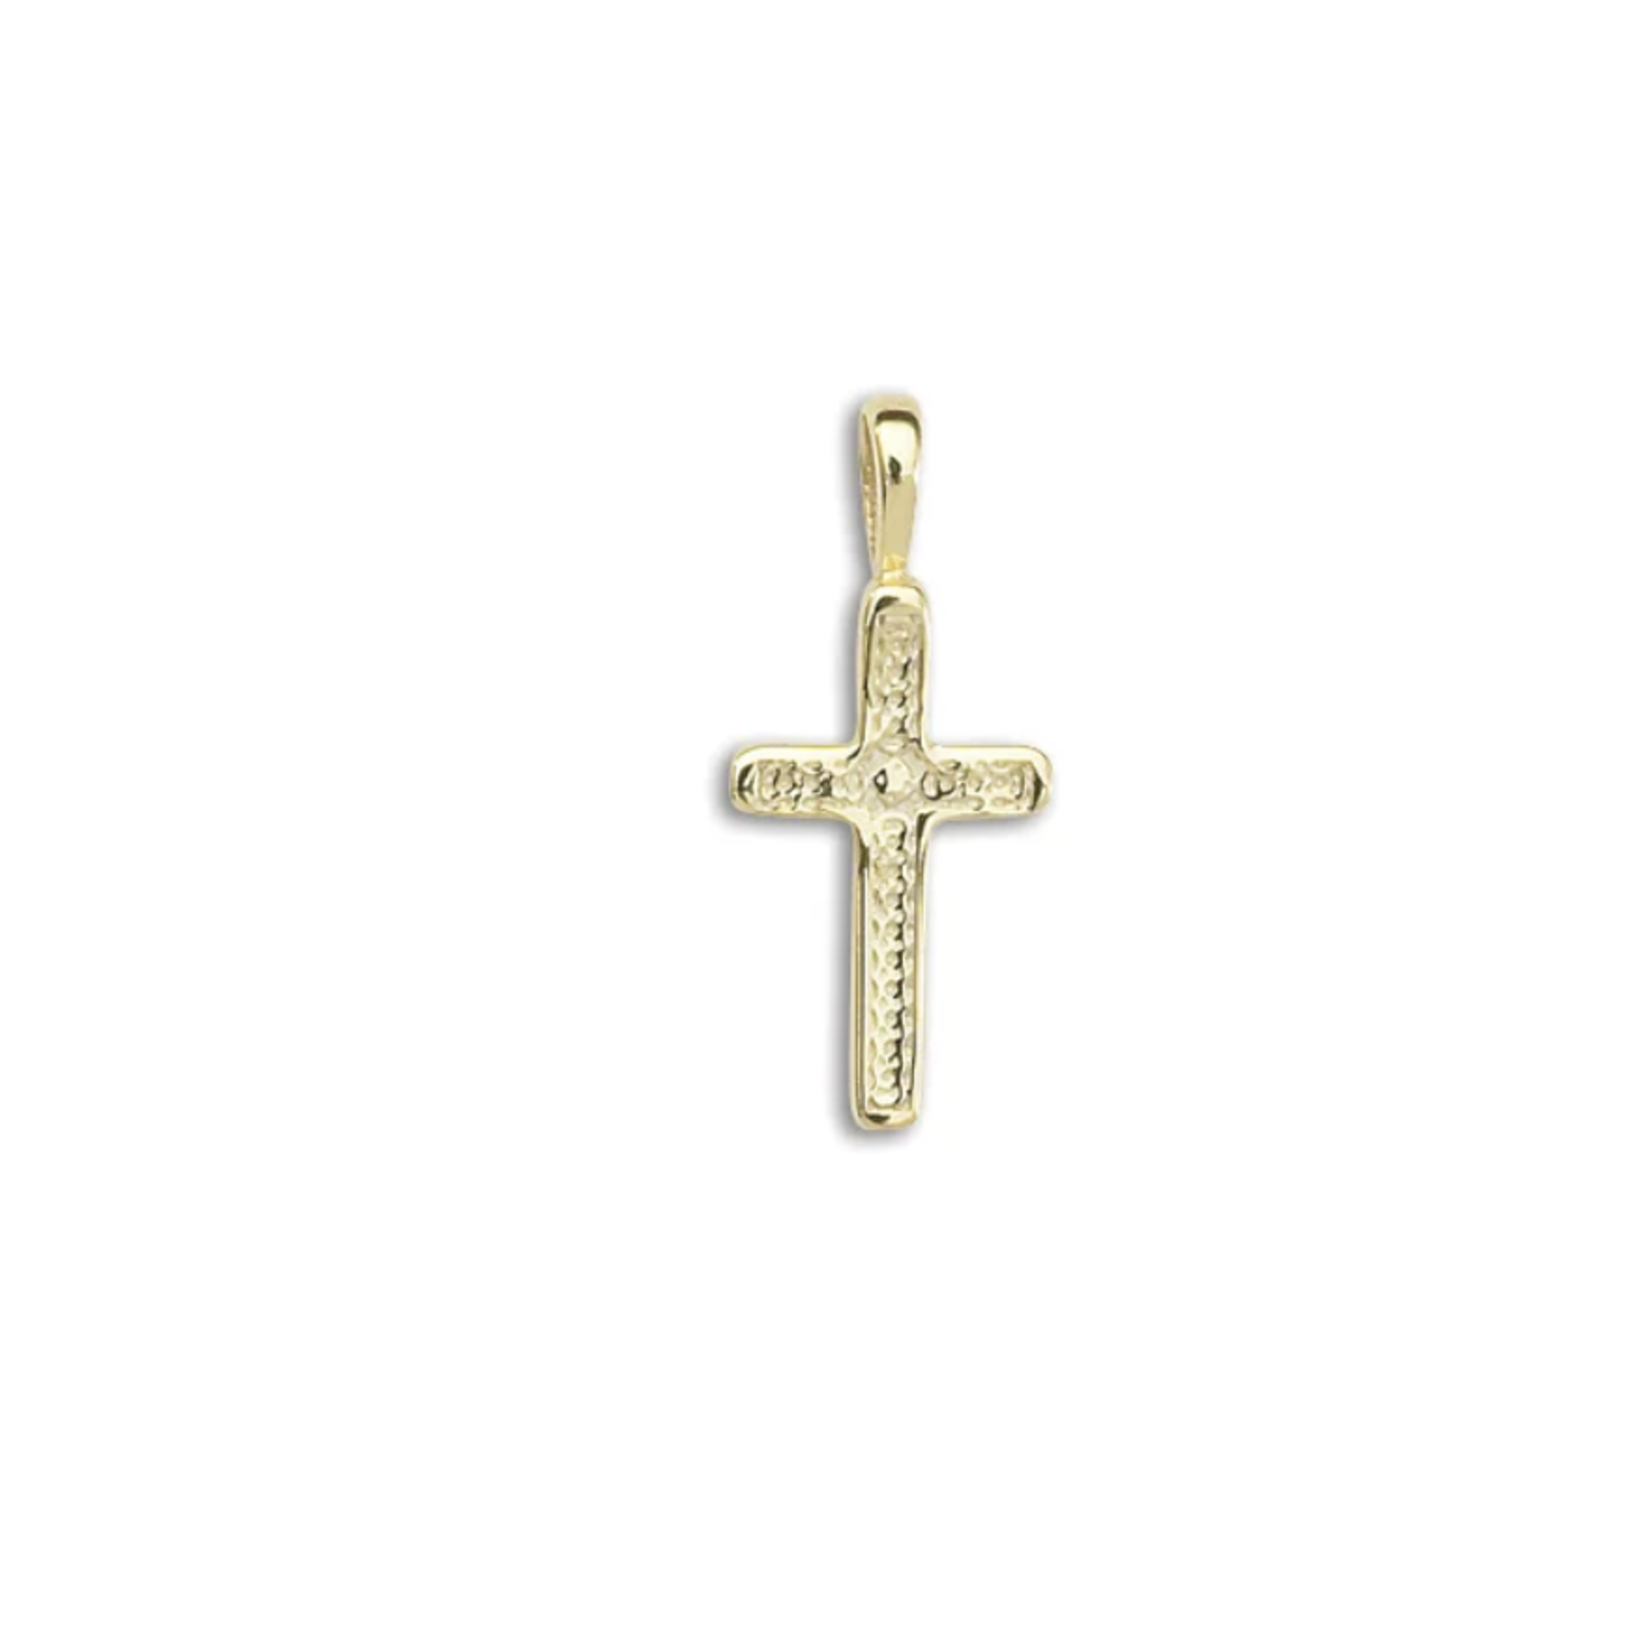 D'Amico 14K Yellow Gold Small Knot Cross pendant